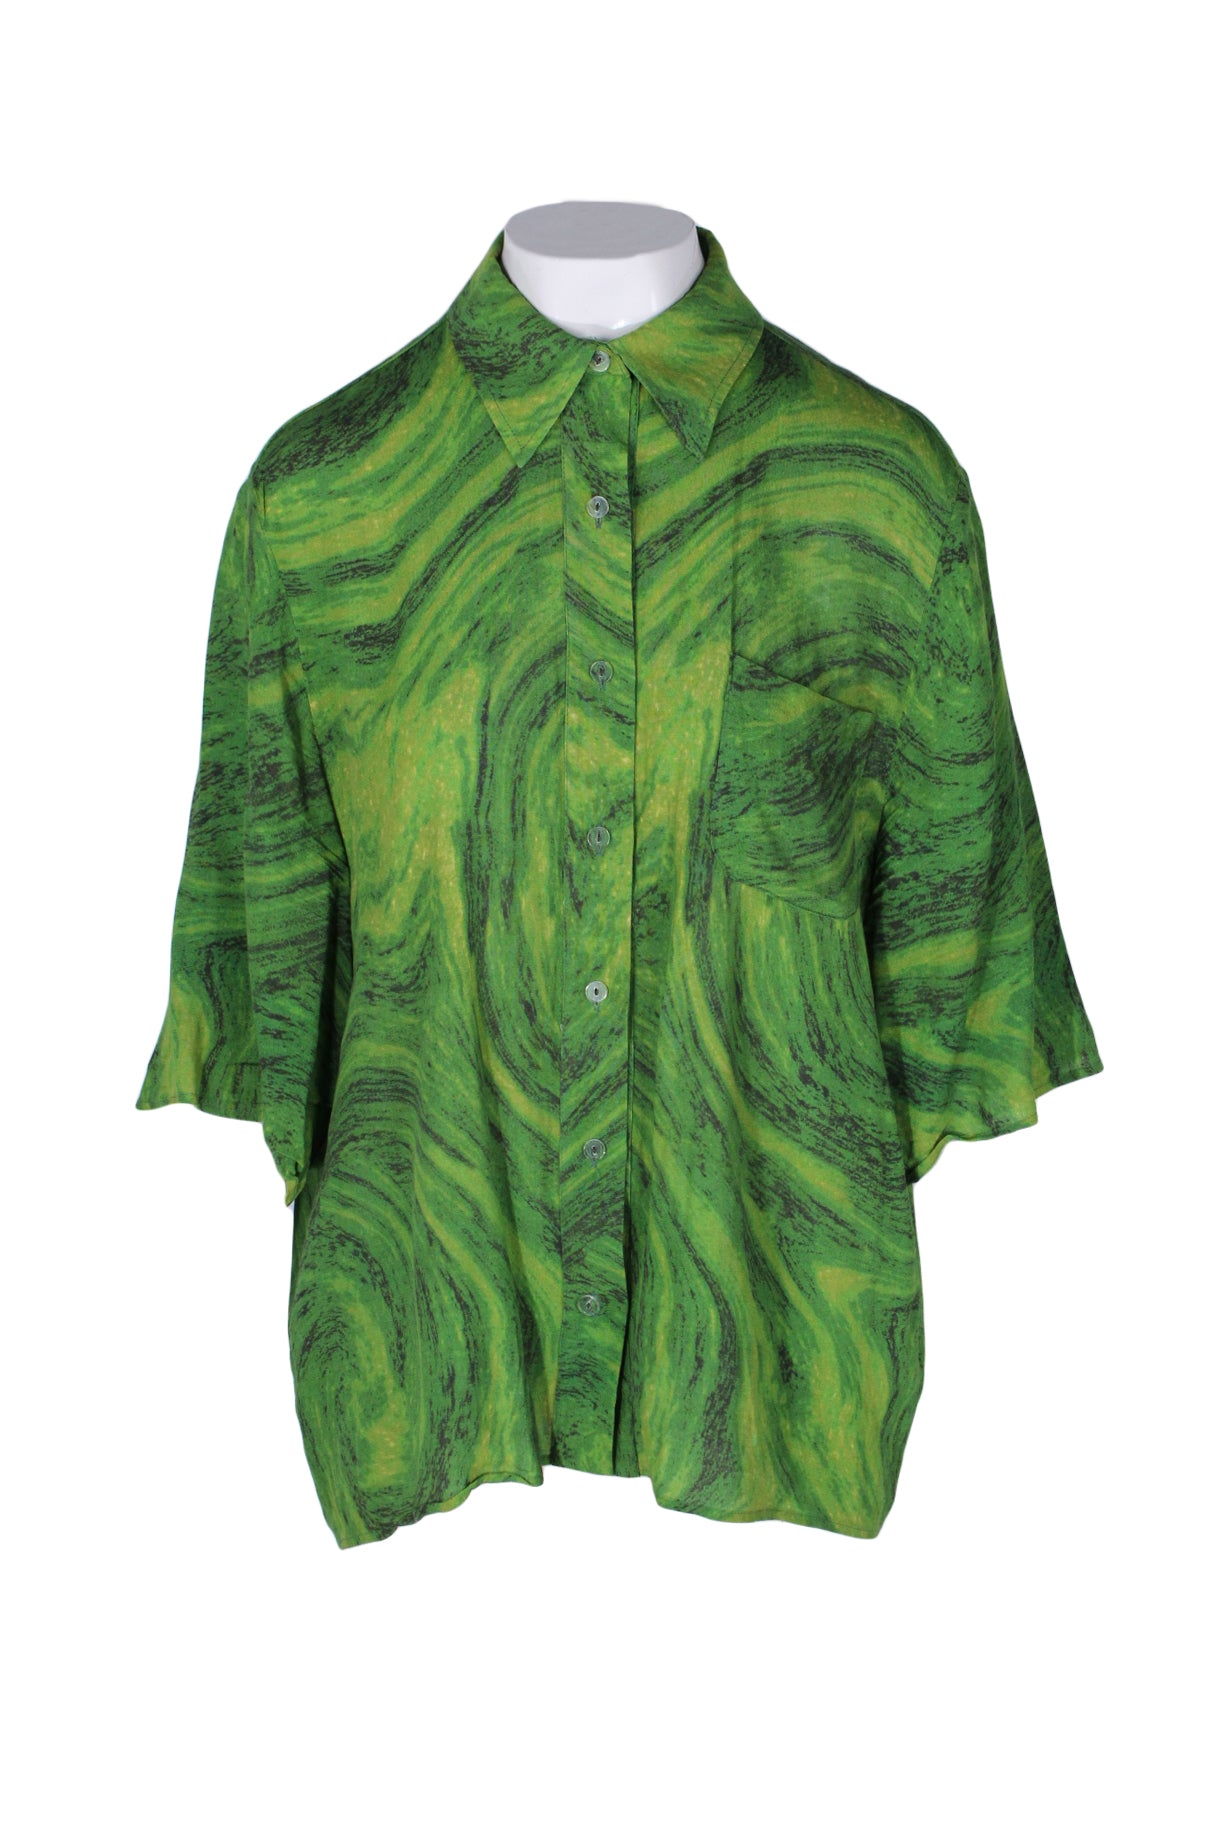 description: collina strada green swirl print short sleeve shirt. features collar, button down closure at center front, and loose fit. 